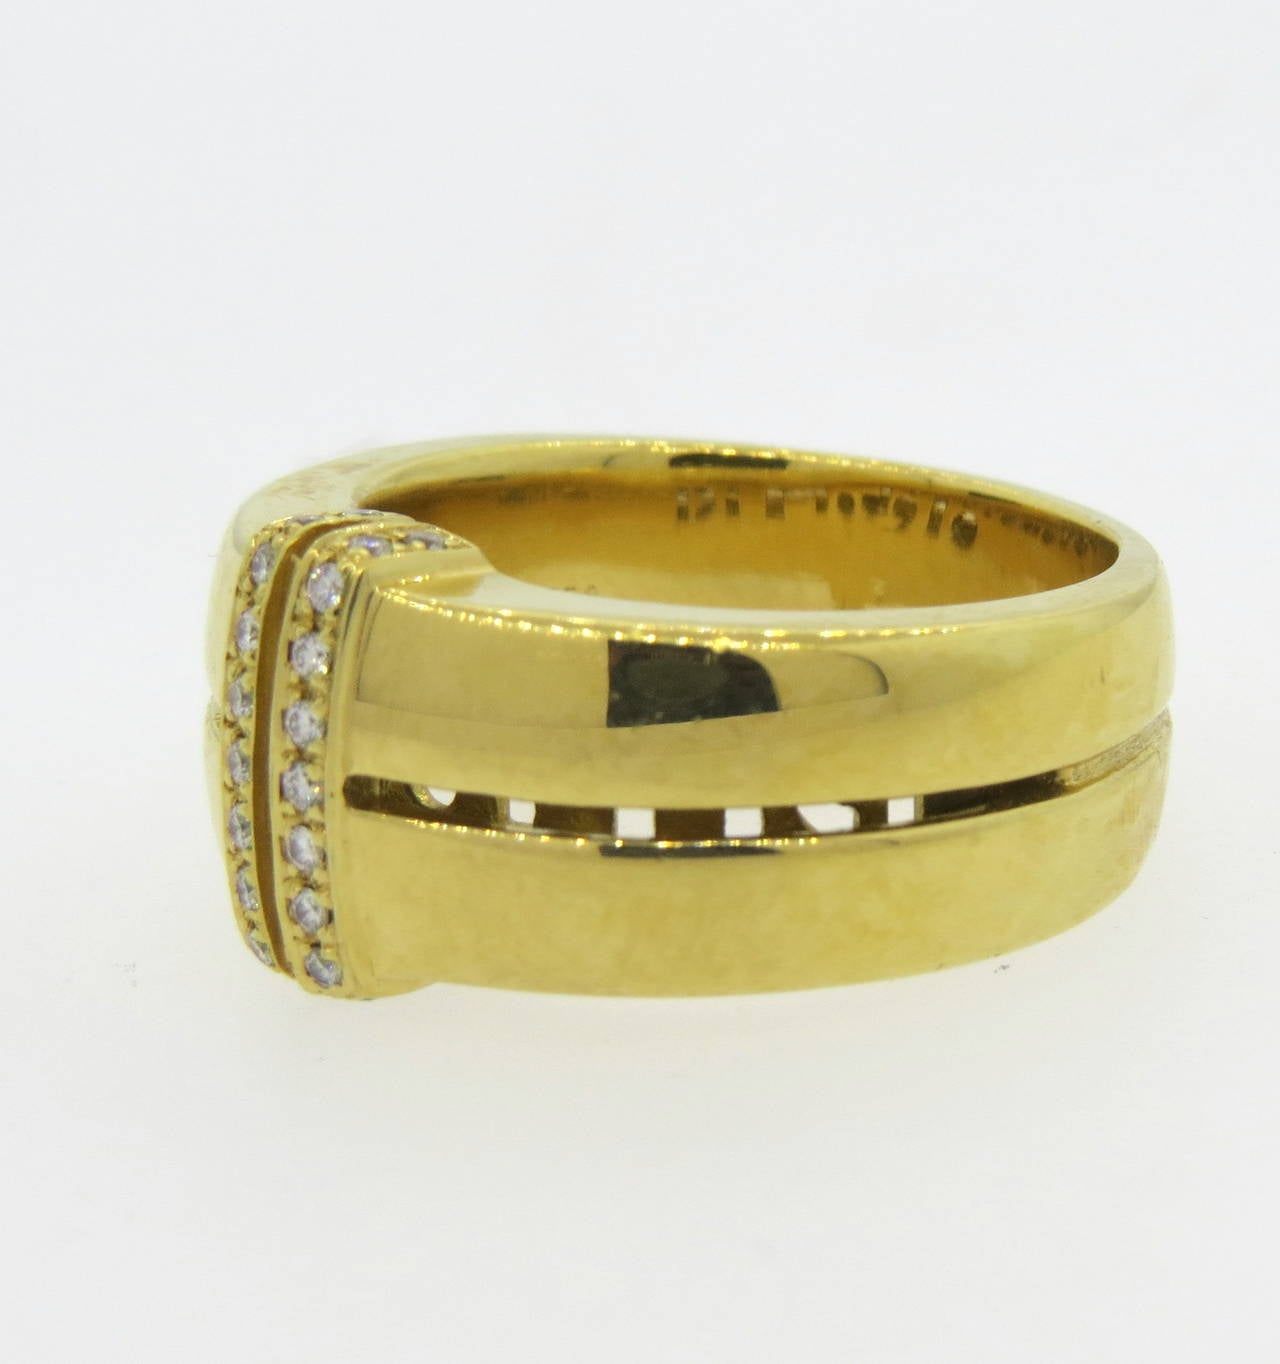 An 18k yellow gold ring set with approximately 0.11cts in G/VS diamonds.  Crafted by Di Modolo, the ring is a size 9 and weighs 17.9 grams. Marked: Di Modolo, 750